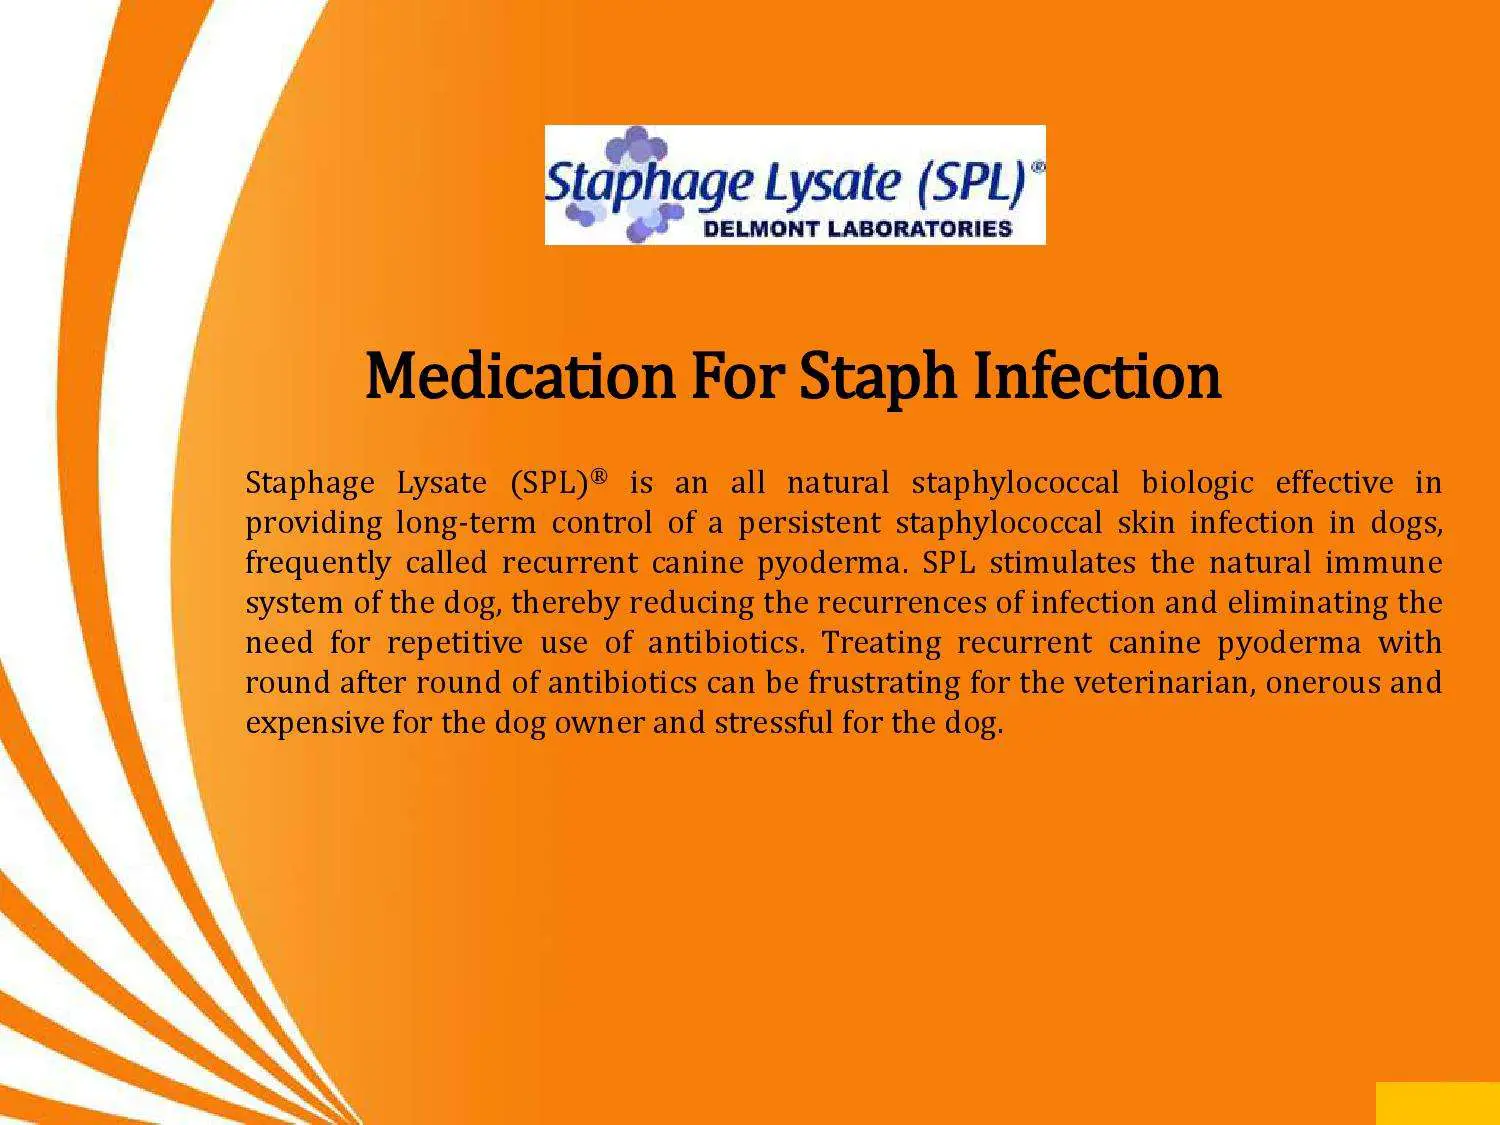 Medication for staph infection by delmontlabs